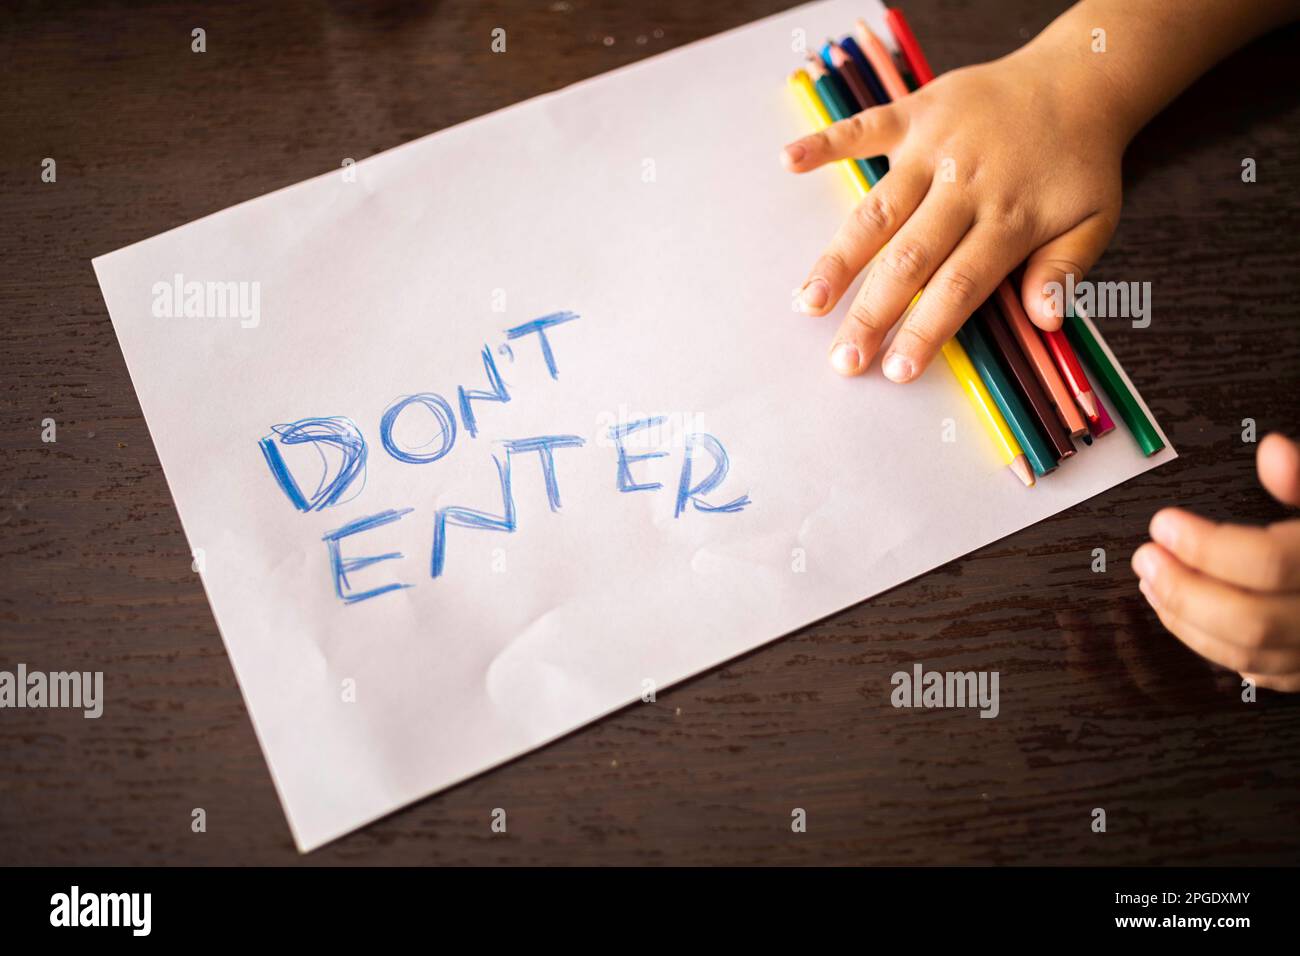 Children's Privacy and Personal Space concept. child's hands with pencils and paper wrote do not enter Stock Photo